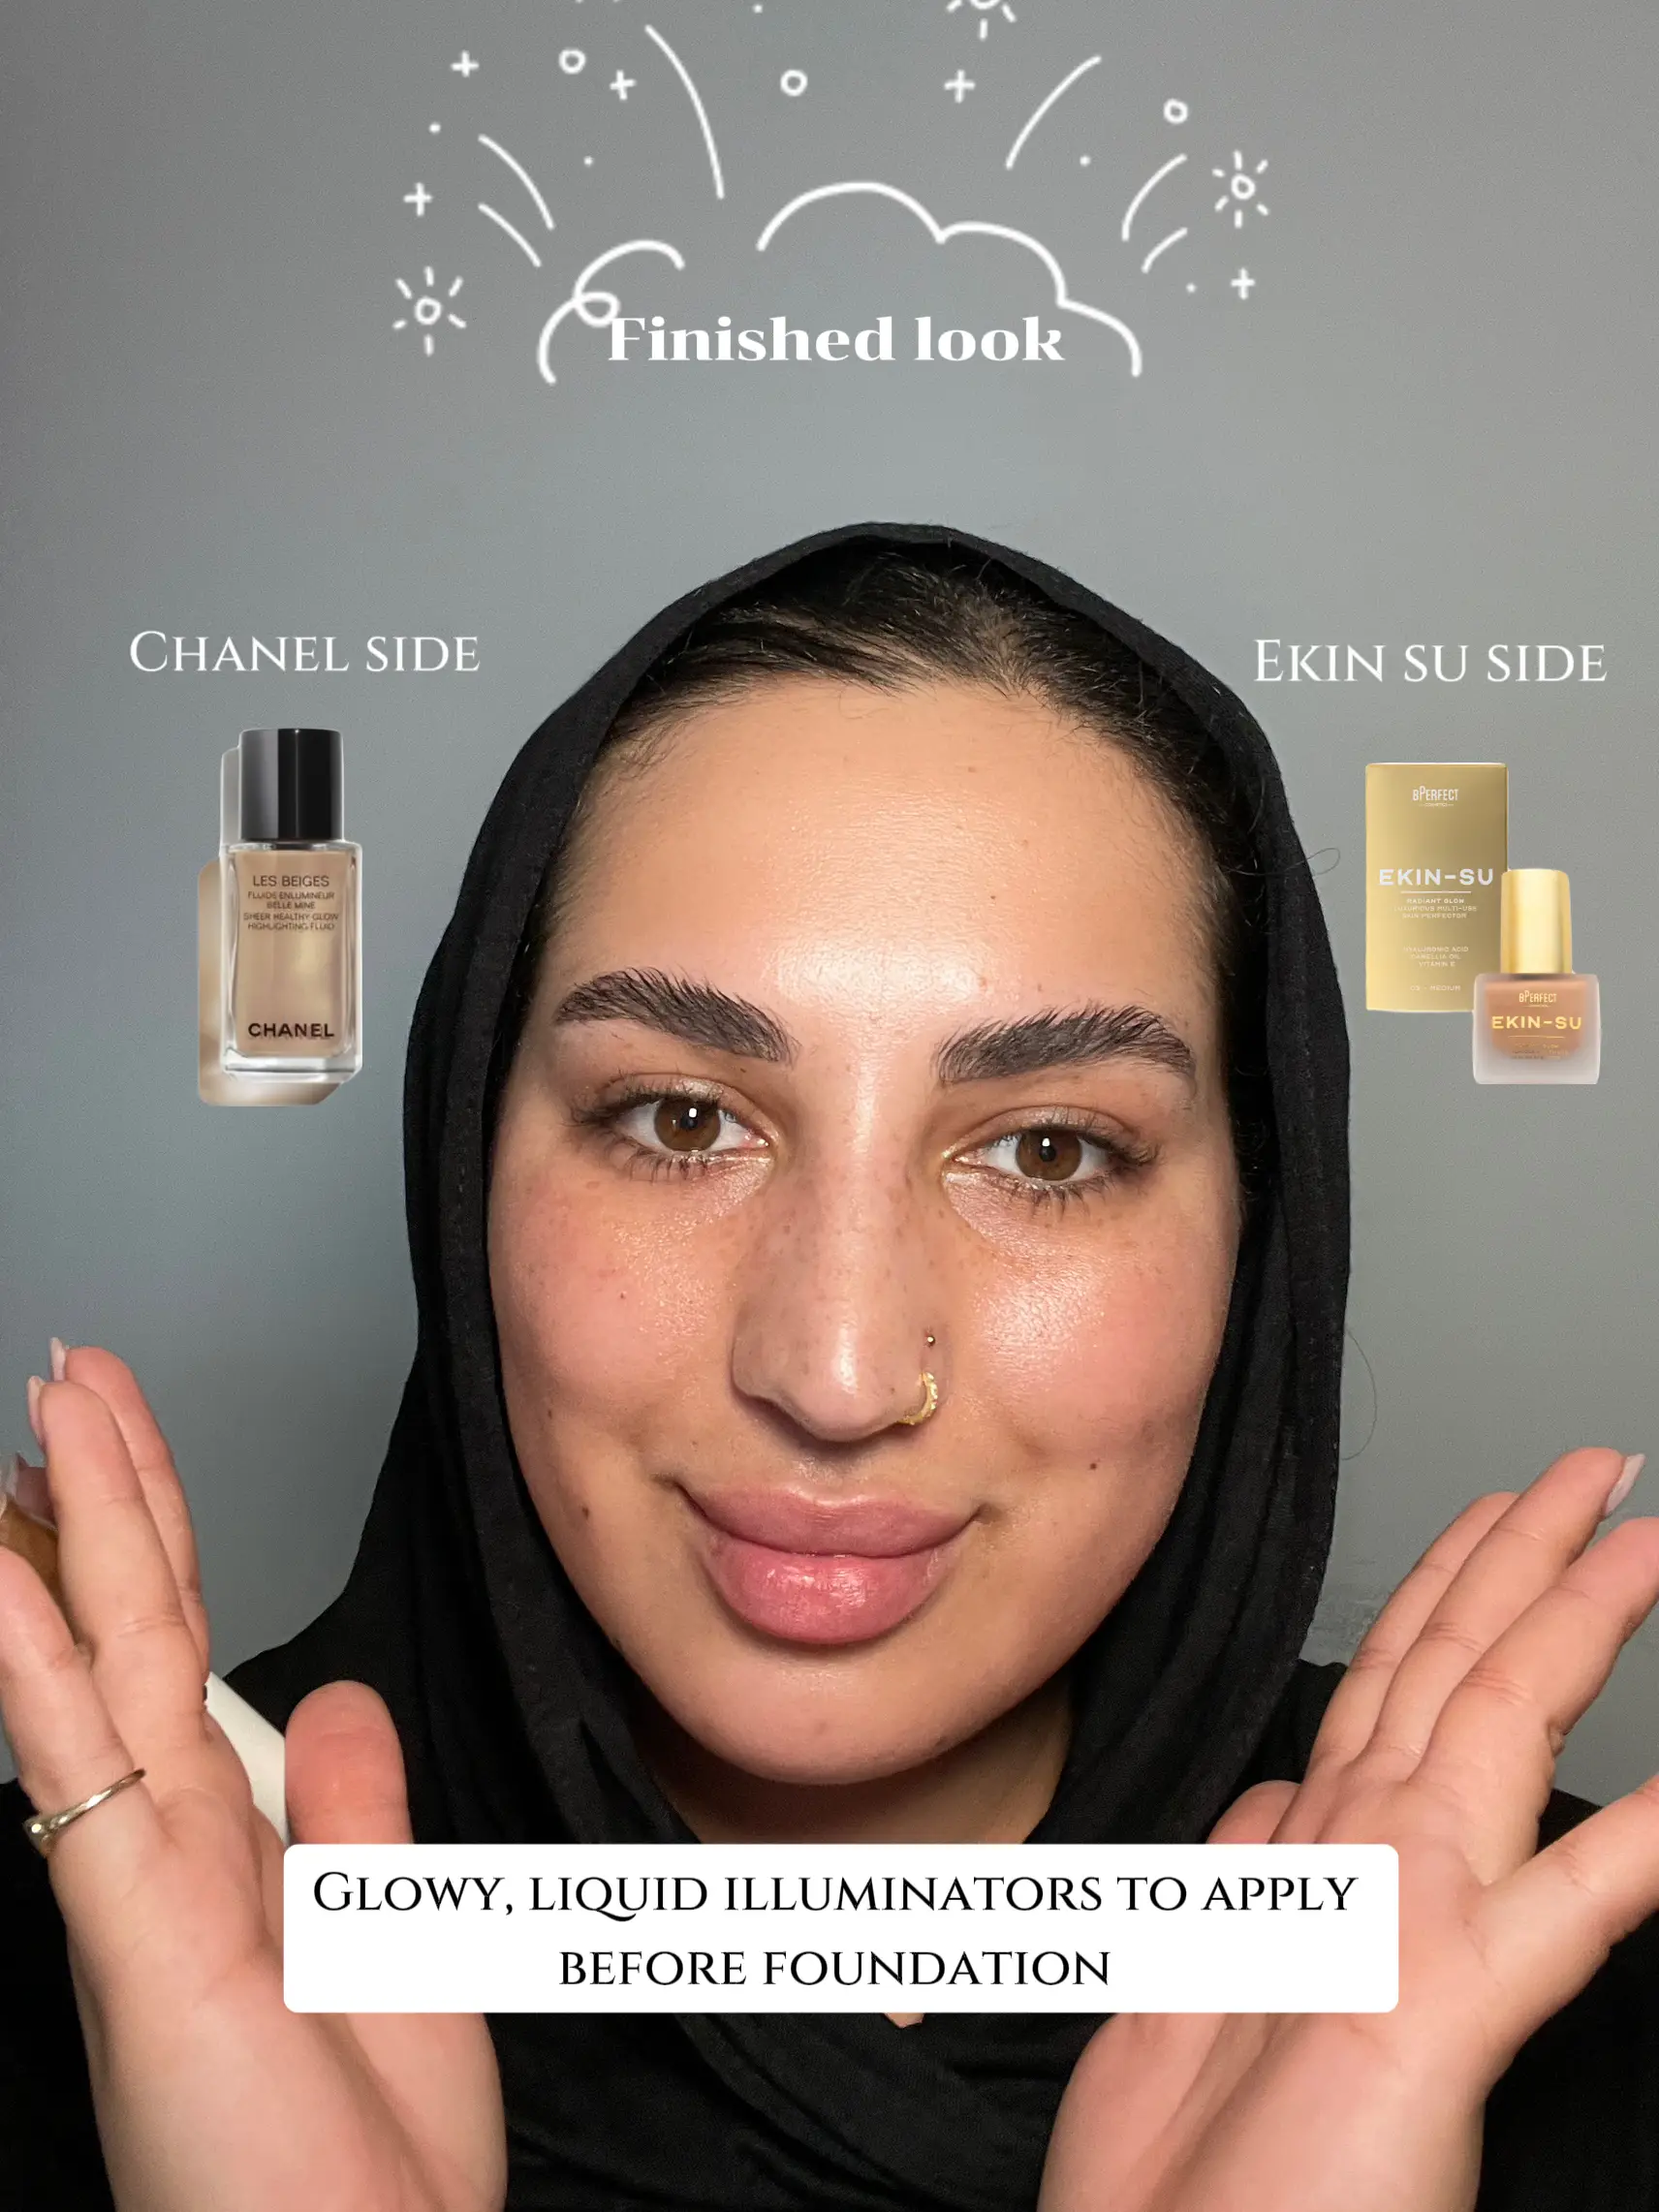 Foundation Review: Chanel Les Beiges Healthy Glow Makeup - Ruth Crilly